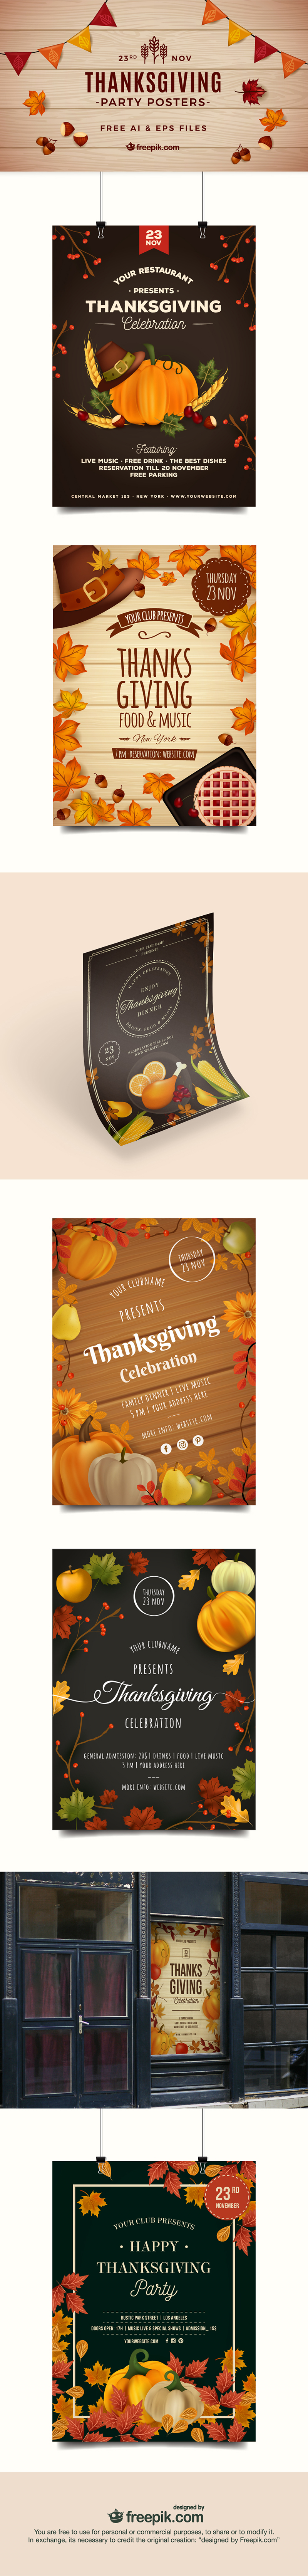 Thanksgiving Party Poster Designs